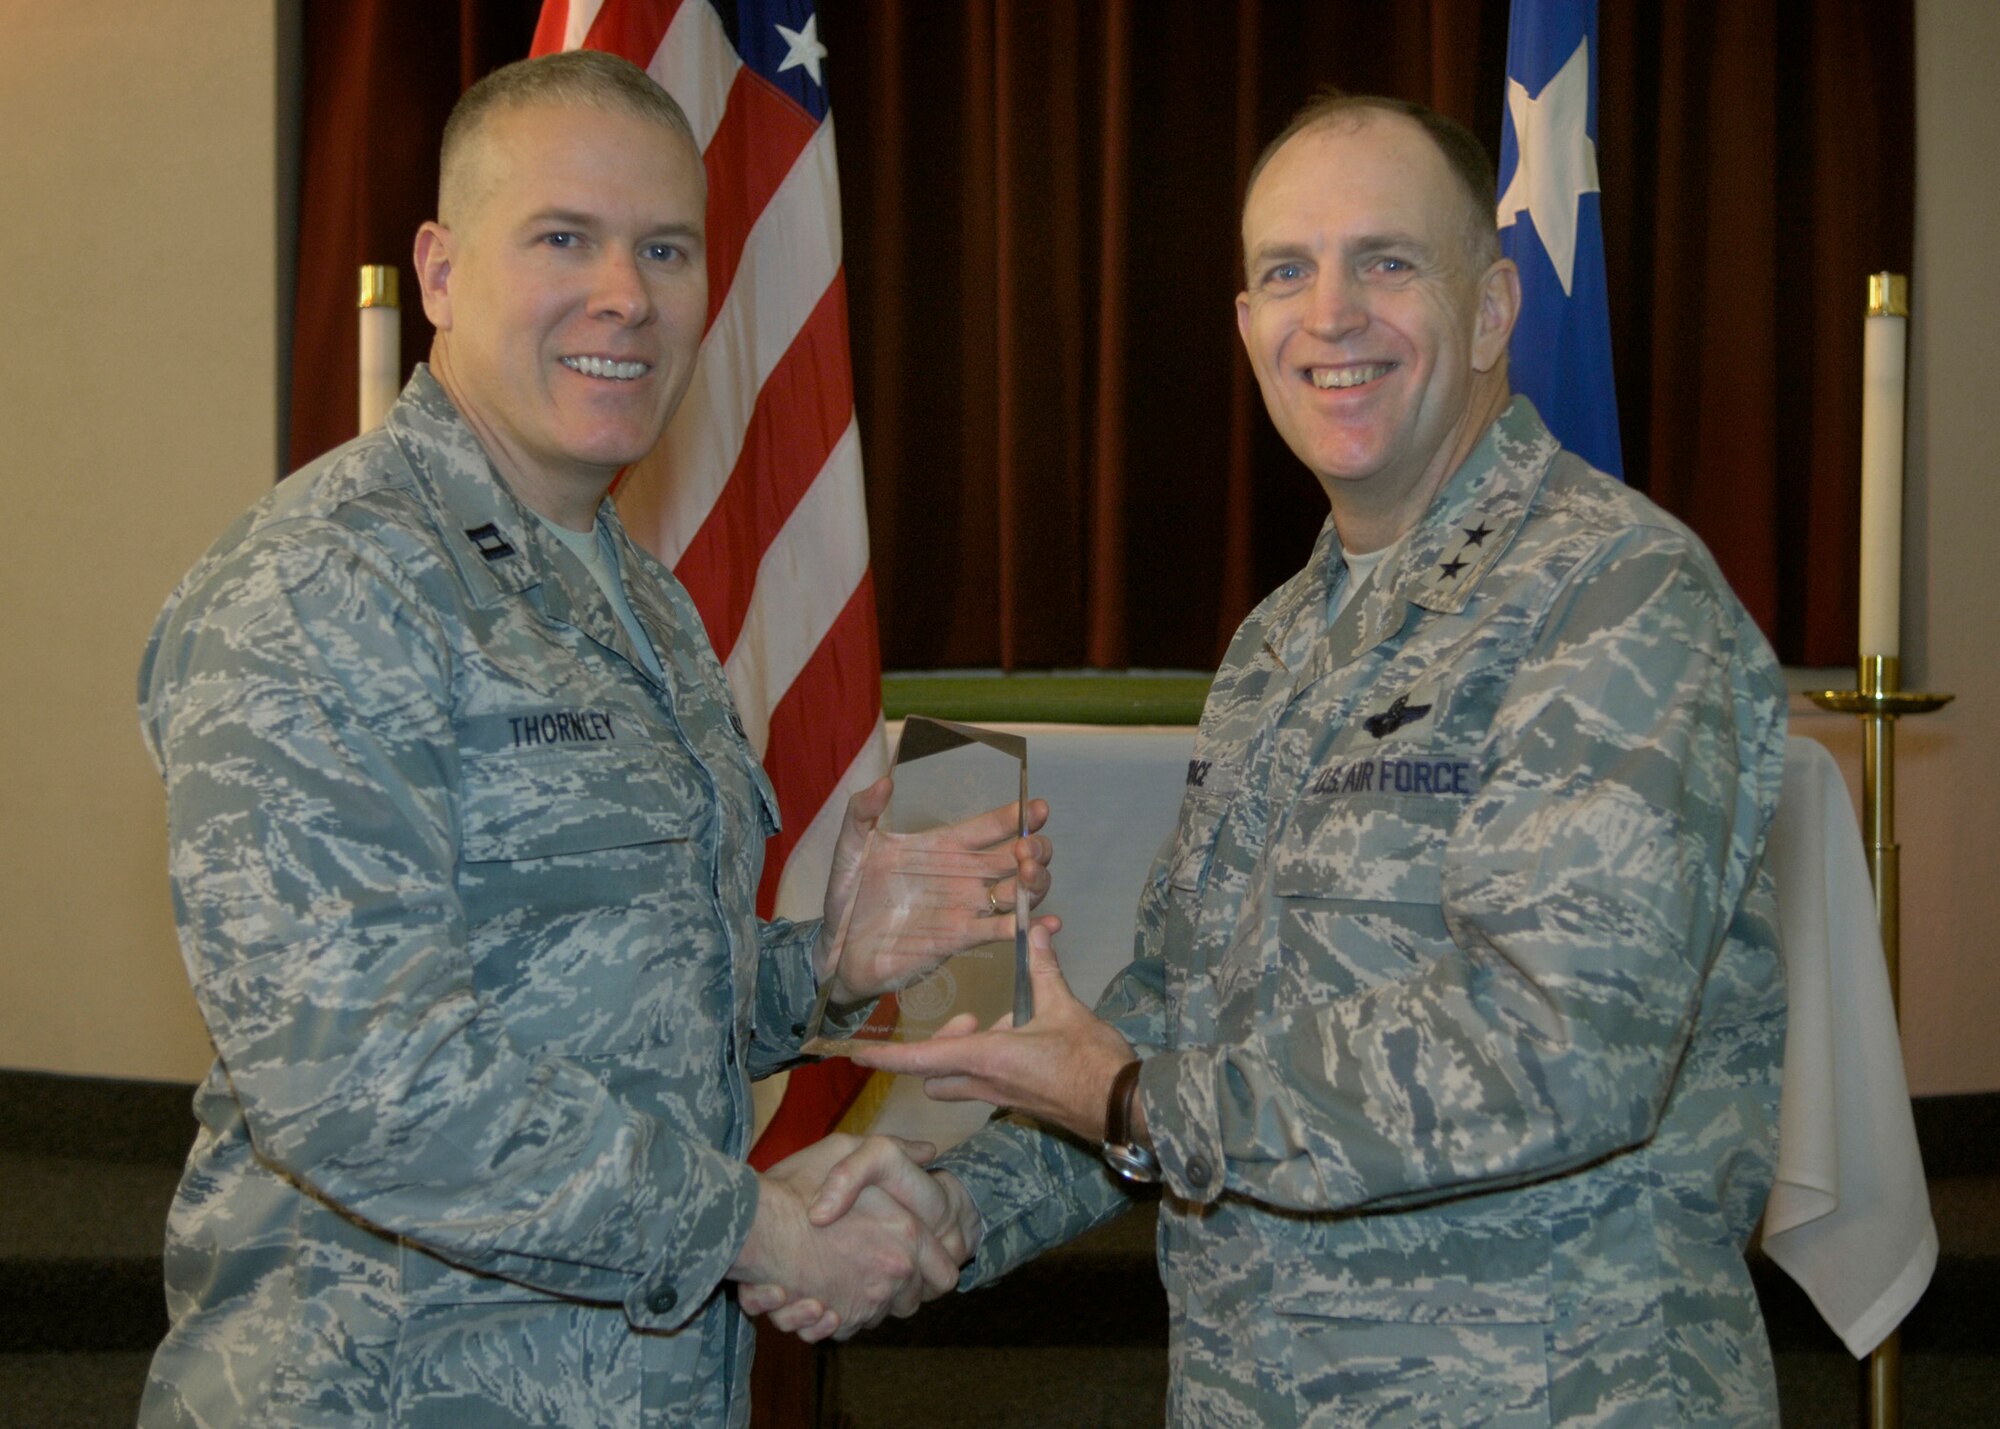 Maj. Gen. Ralph Jodice, Air Force District of Washington commander, presents the AFDW Oustanding Chaplain Corps Company Grade Officer of the Year Award to Chaplain (Capt.) Andrew Thornley. The award presentation took place Feb. 25, 2009, at the Andrews Air Force Base, Md., chapel.  (U.S Air Force photo by Senior Airman Renae Kleckner.)